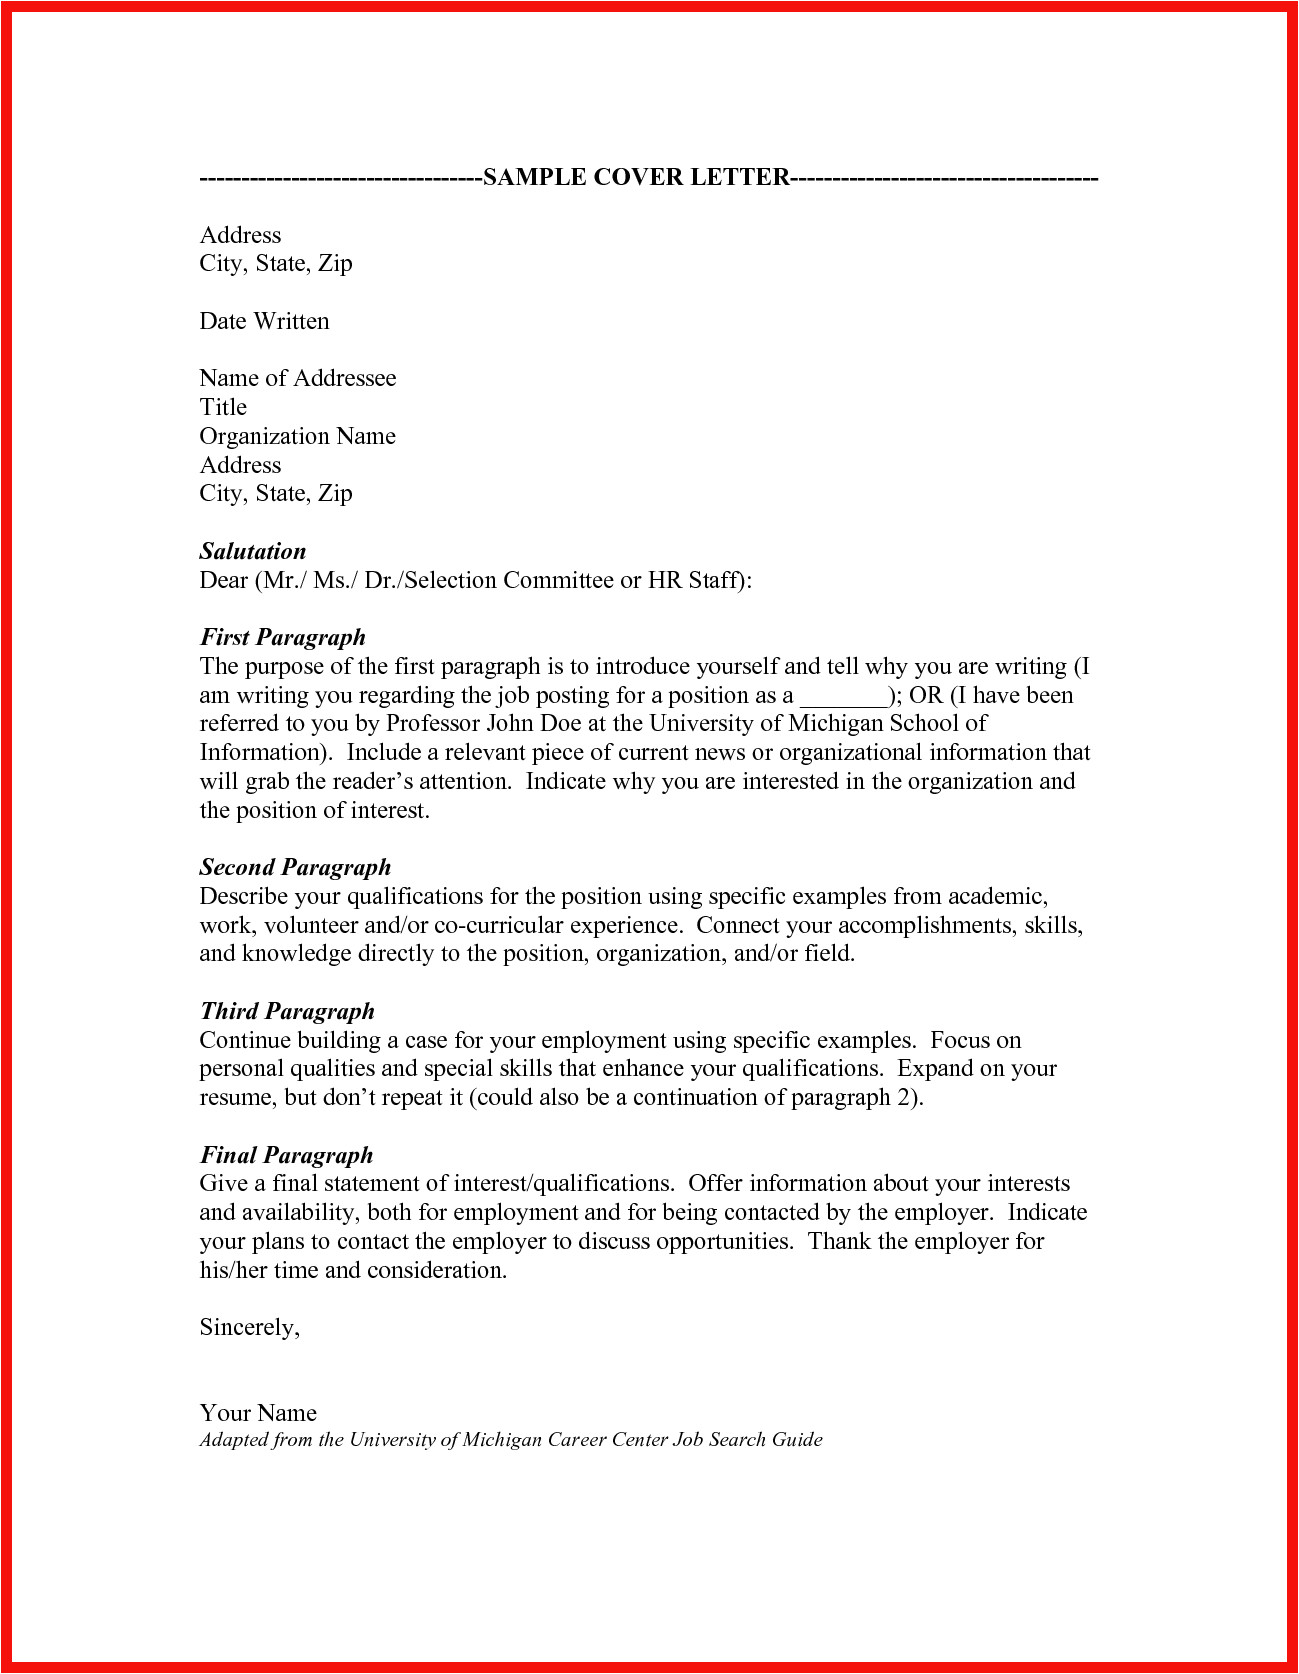 cover letter without name